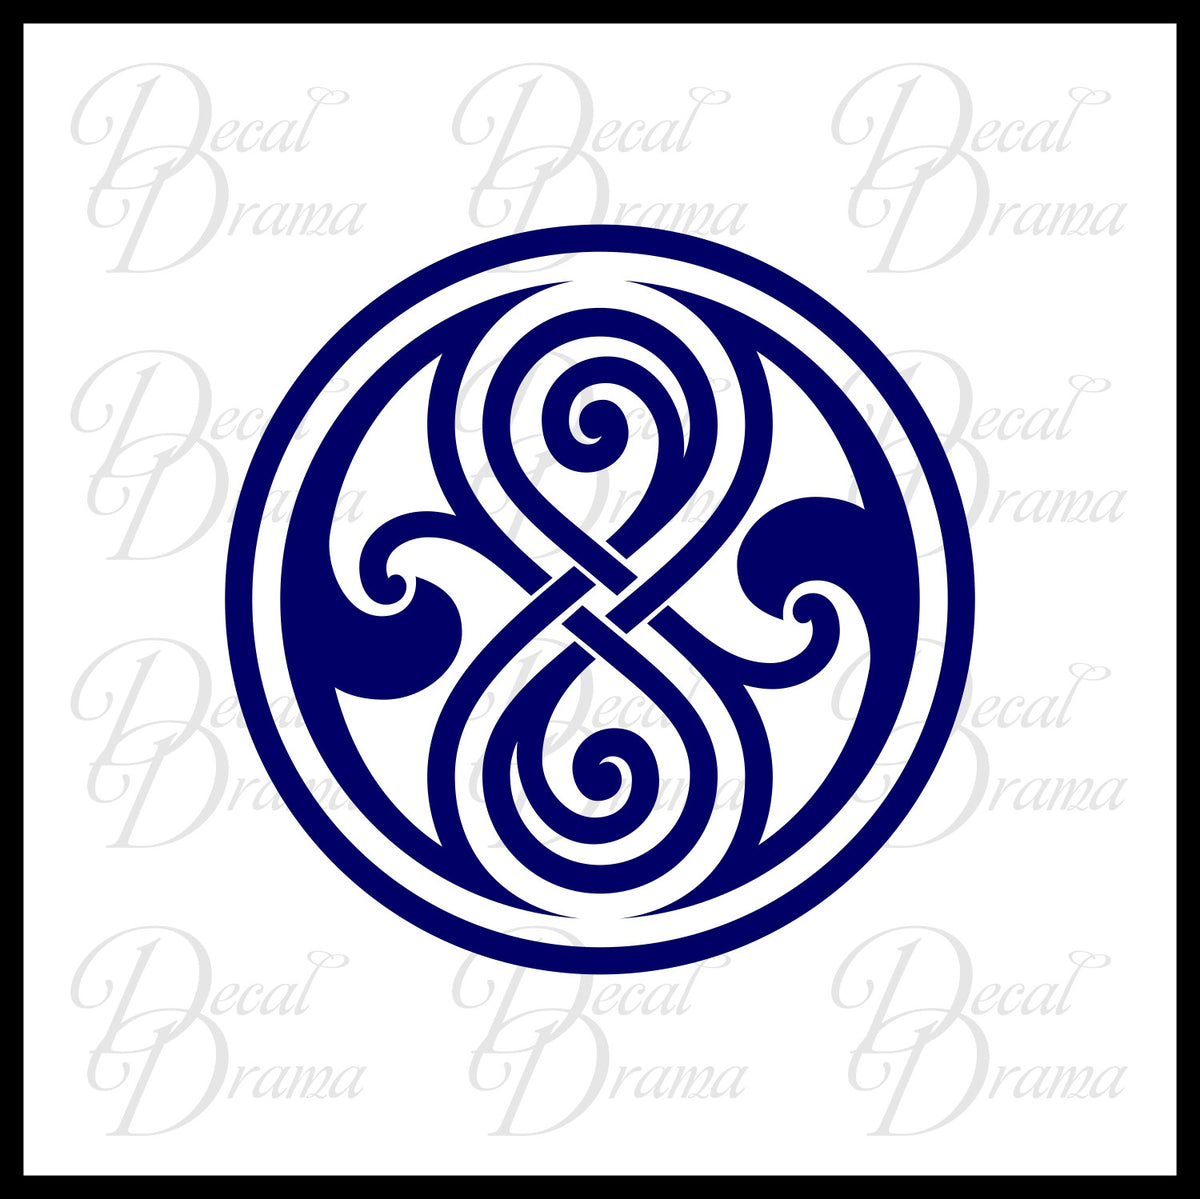 time lord symbol